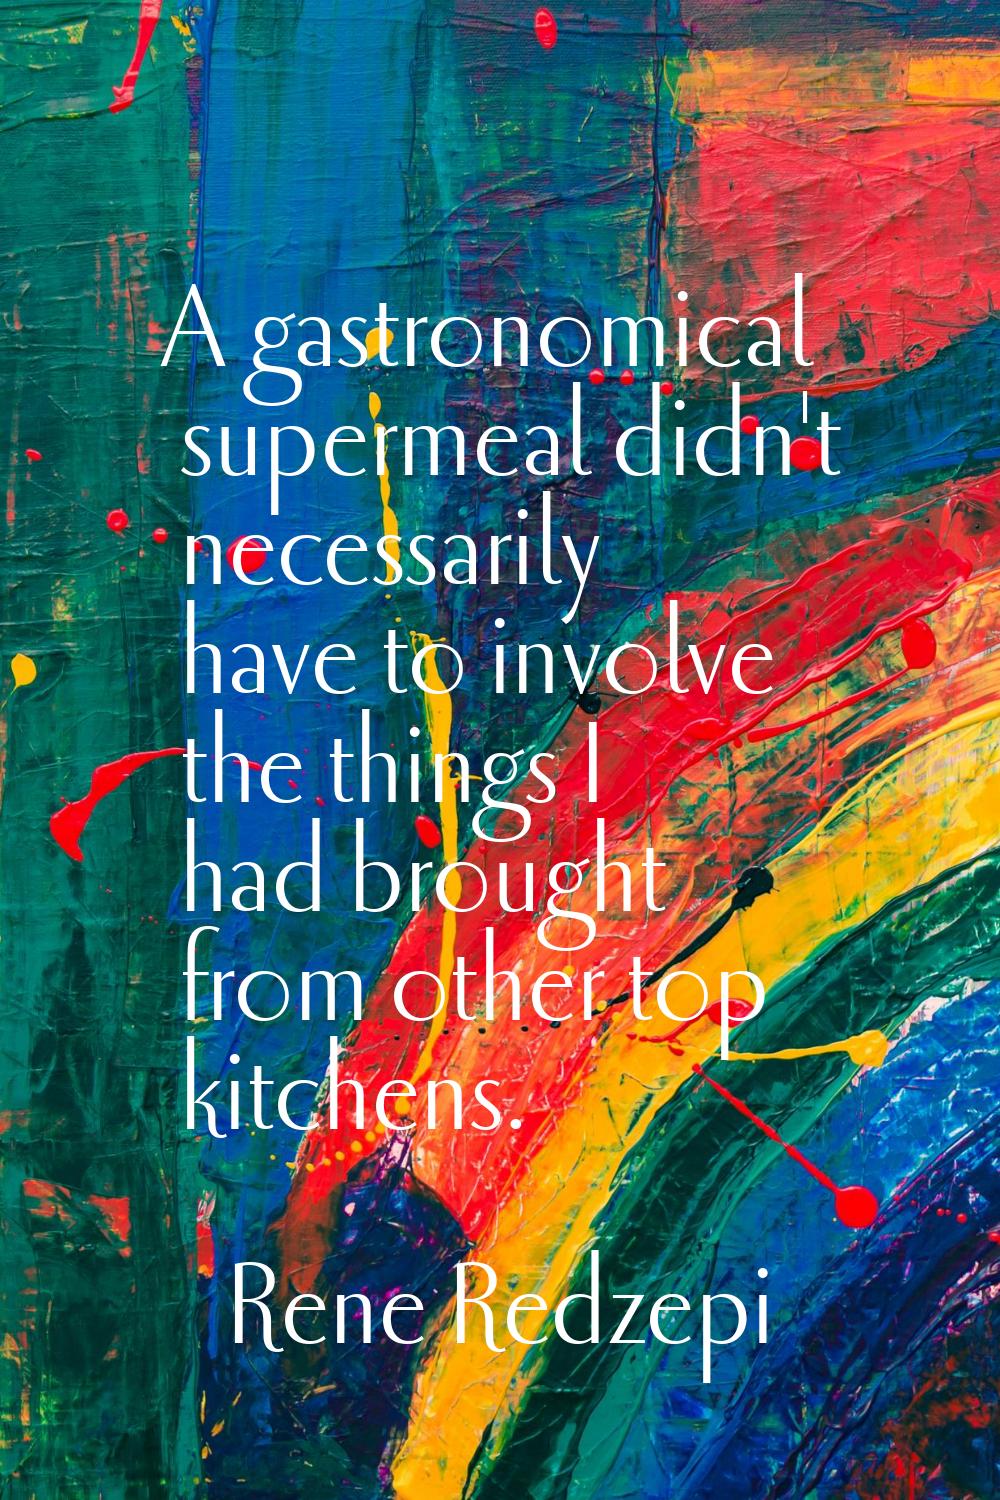 A gastronomical supermeal didn't necessarily have to involve the things I had brought from other to